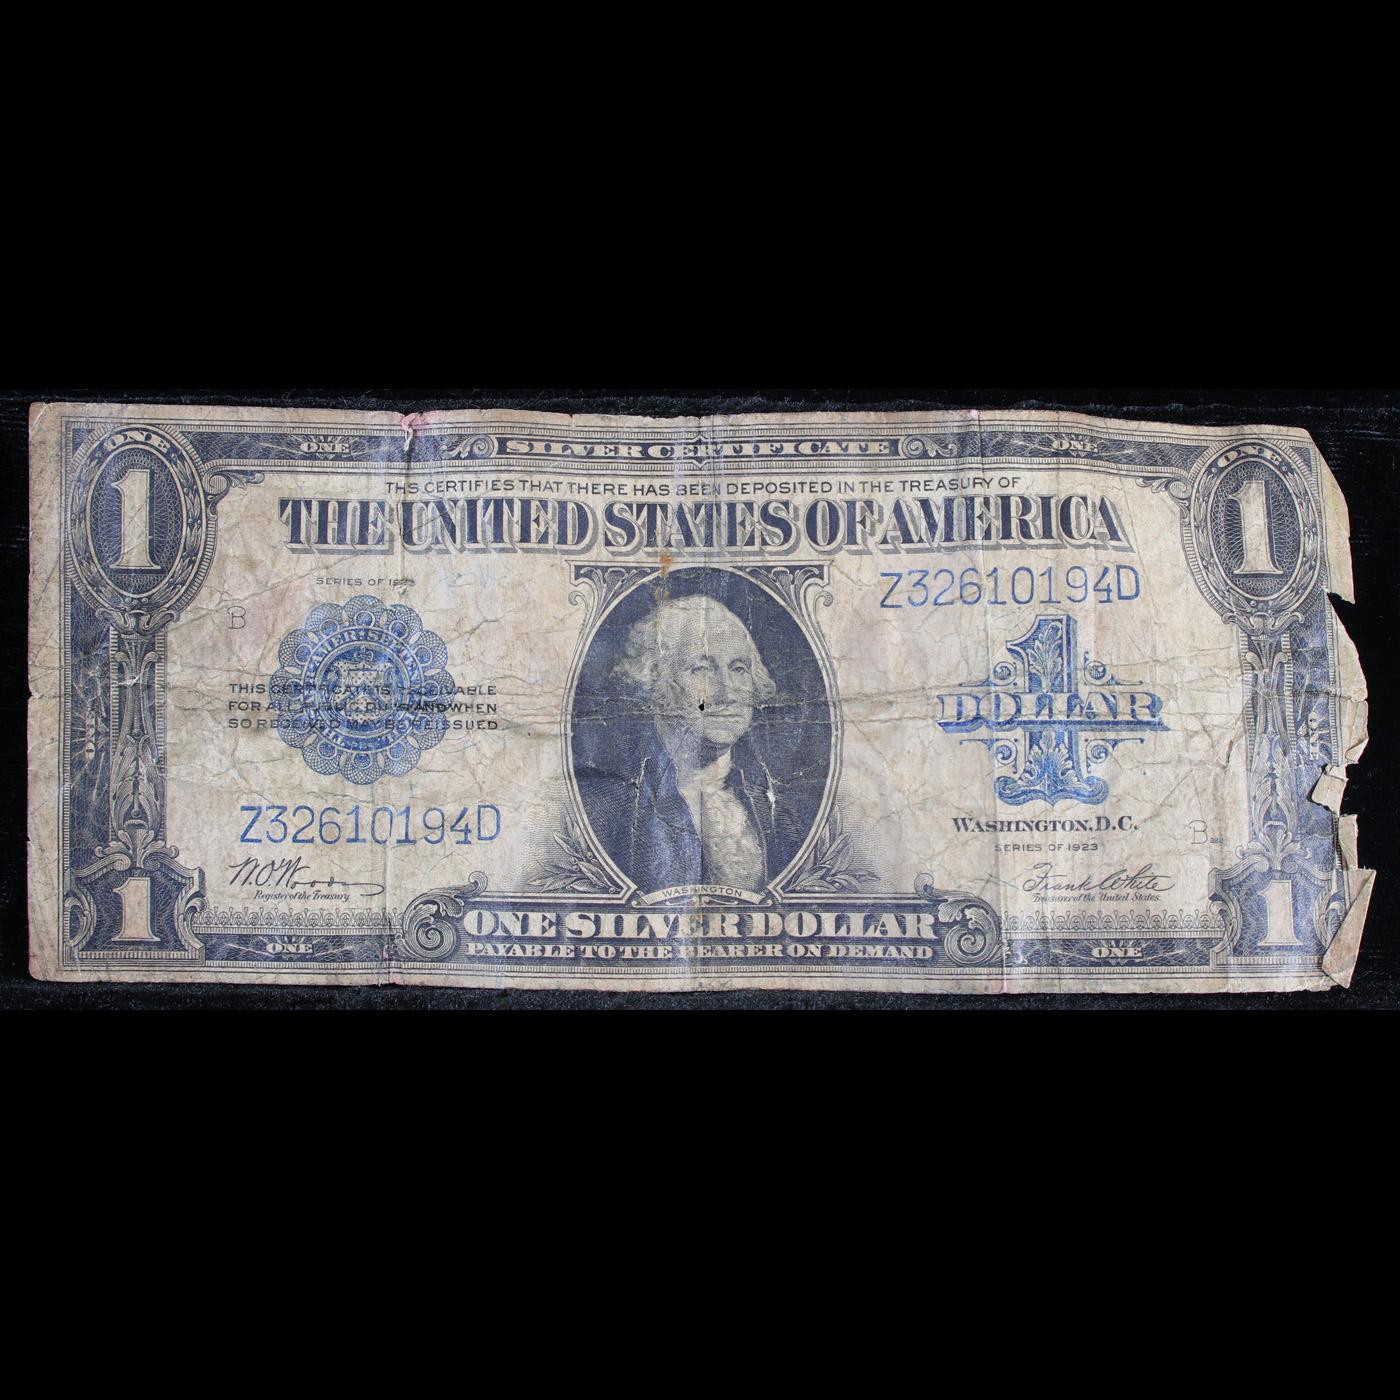 1923 $1 large size Blue Seal Silver Certificate, Signatures of Woods & White Grades vg details